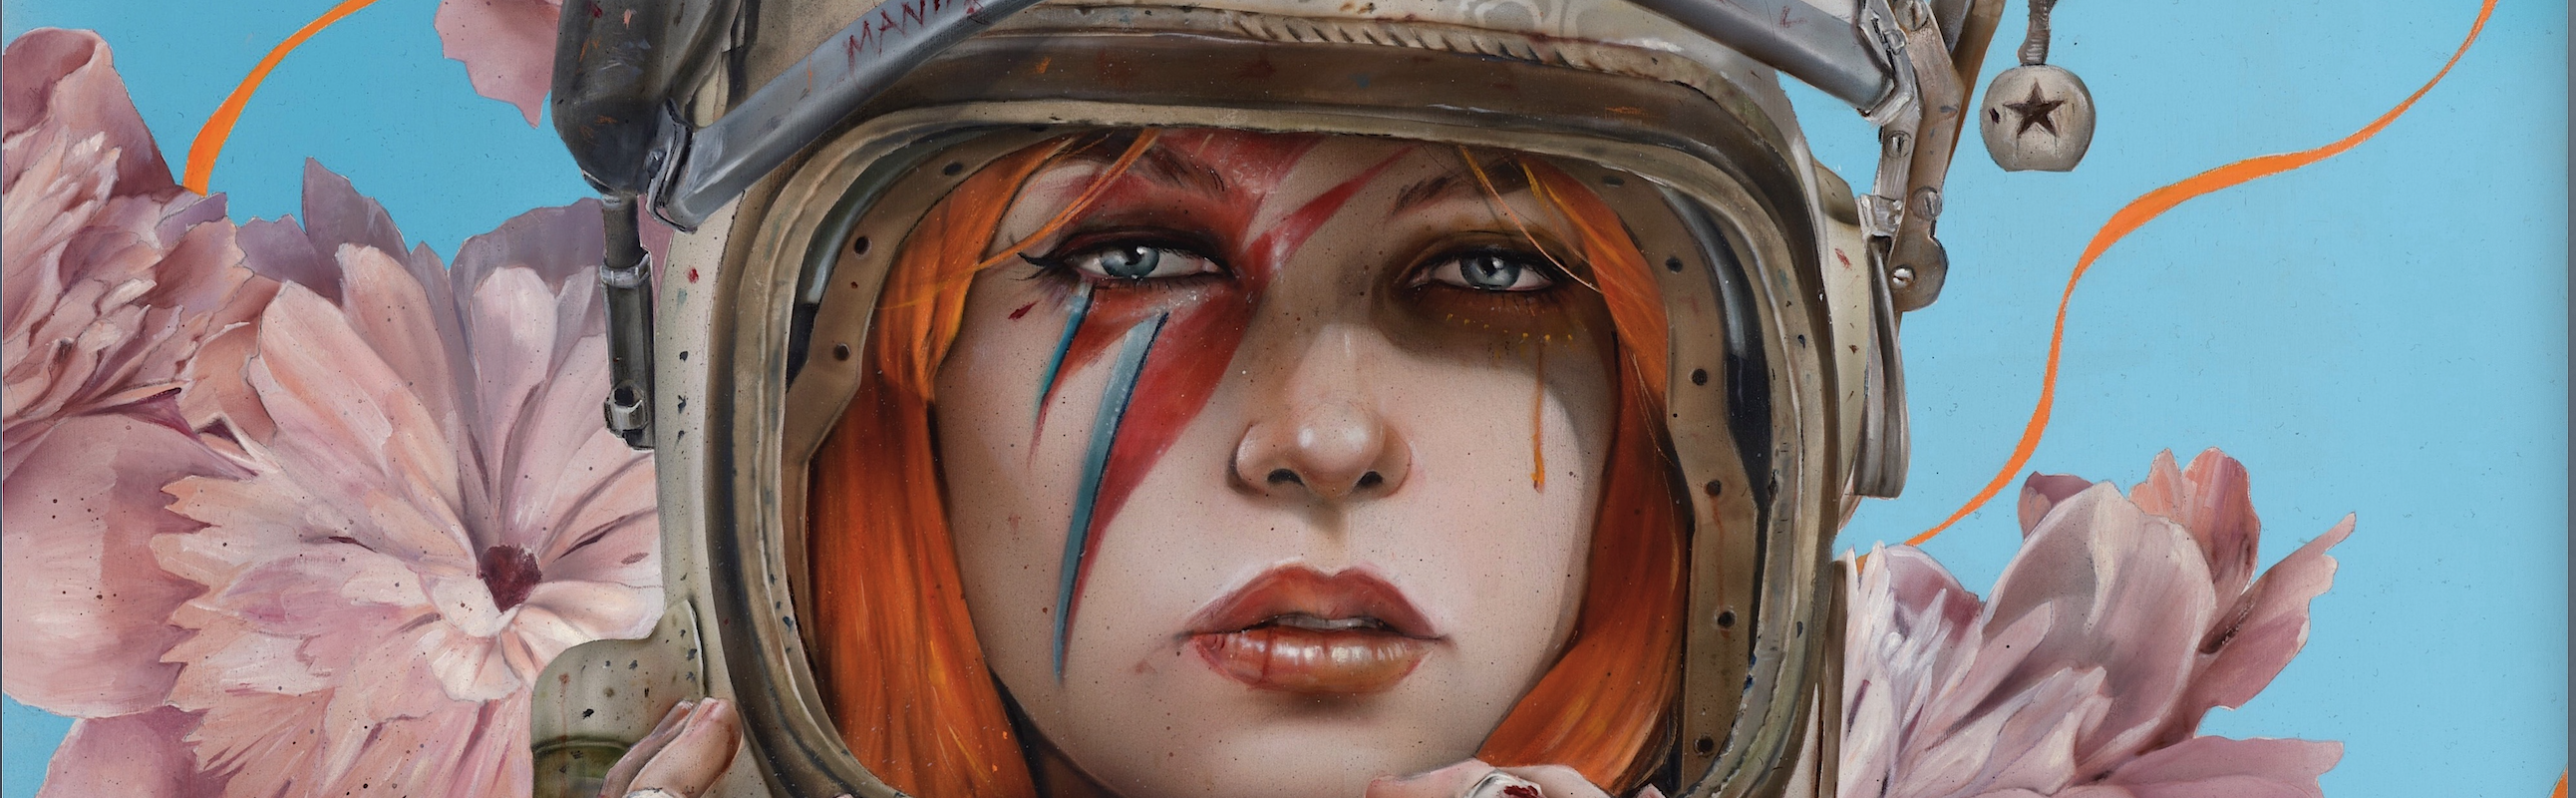 SOLD OUT Viveros ‘Life On Mars’ Print Release This Saturday Feb. 25th 